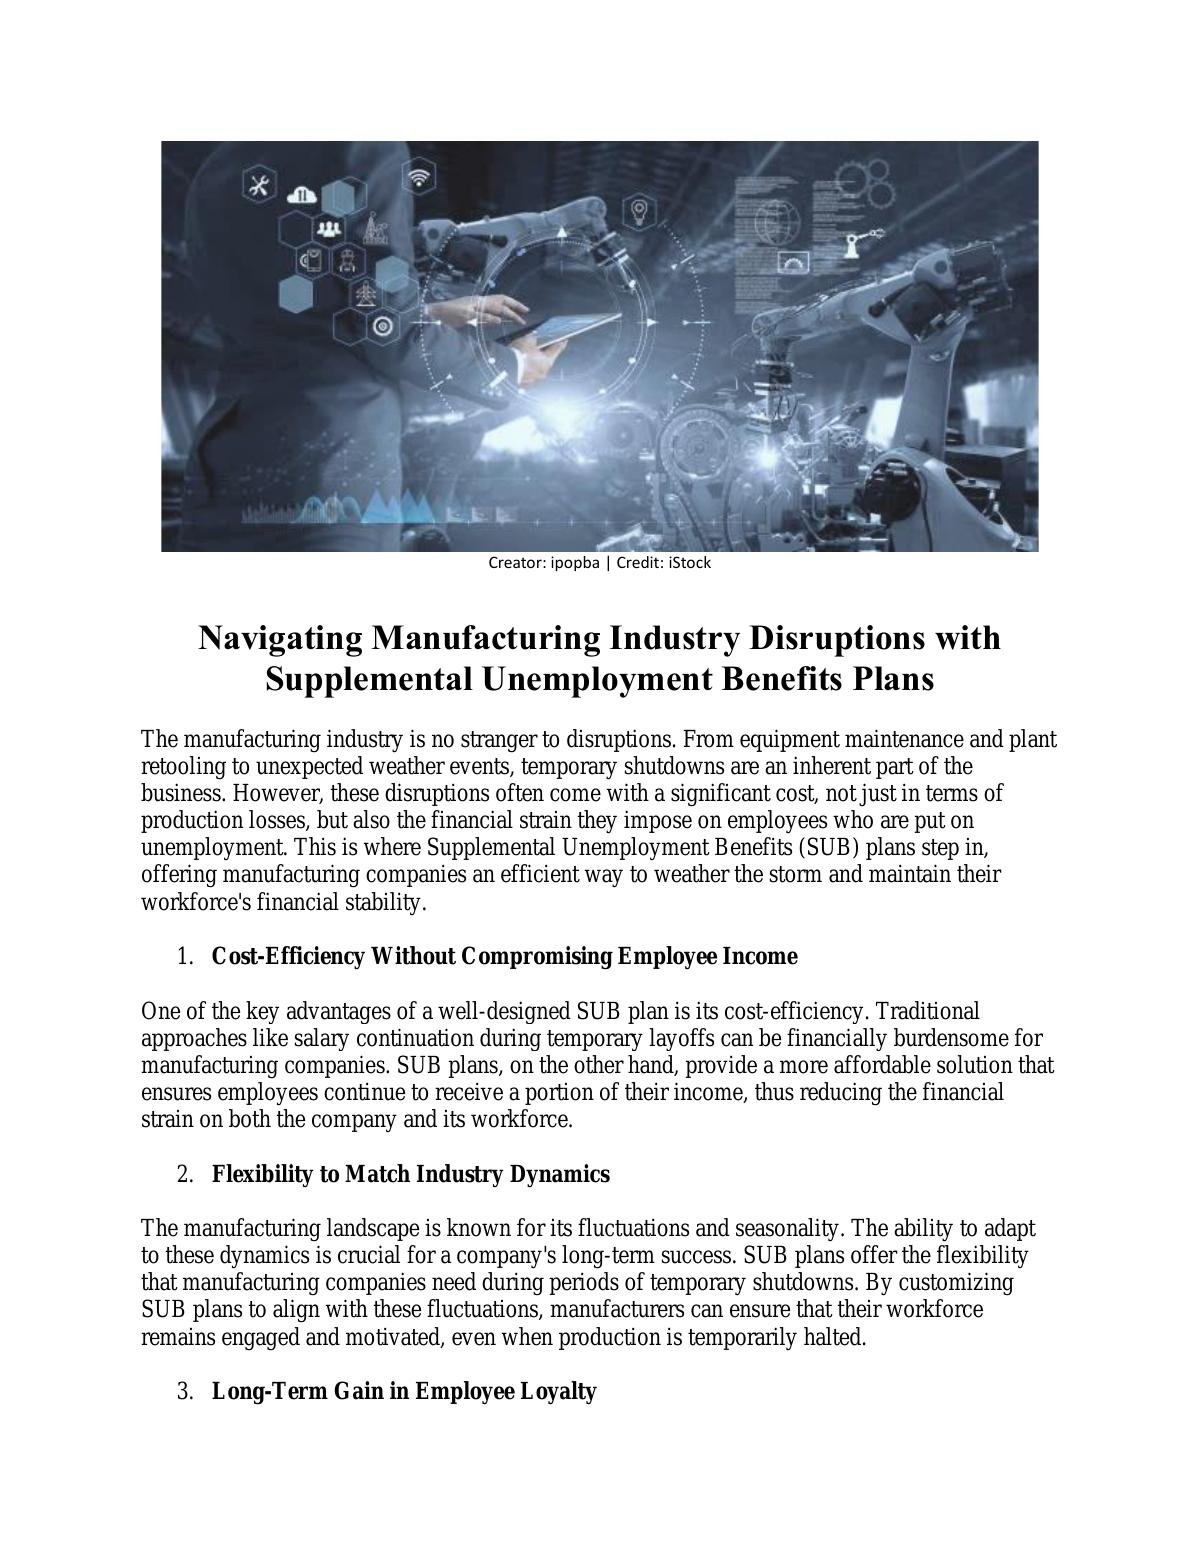 Navigating Manufacturing Industry Disruptions with Supplemental Unemployment Benefits Plans